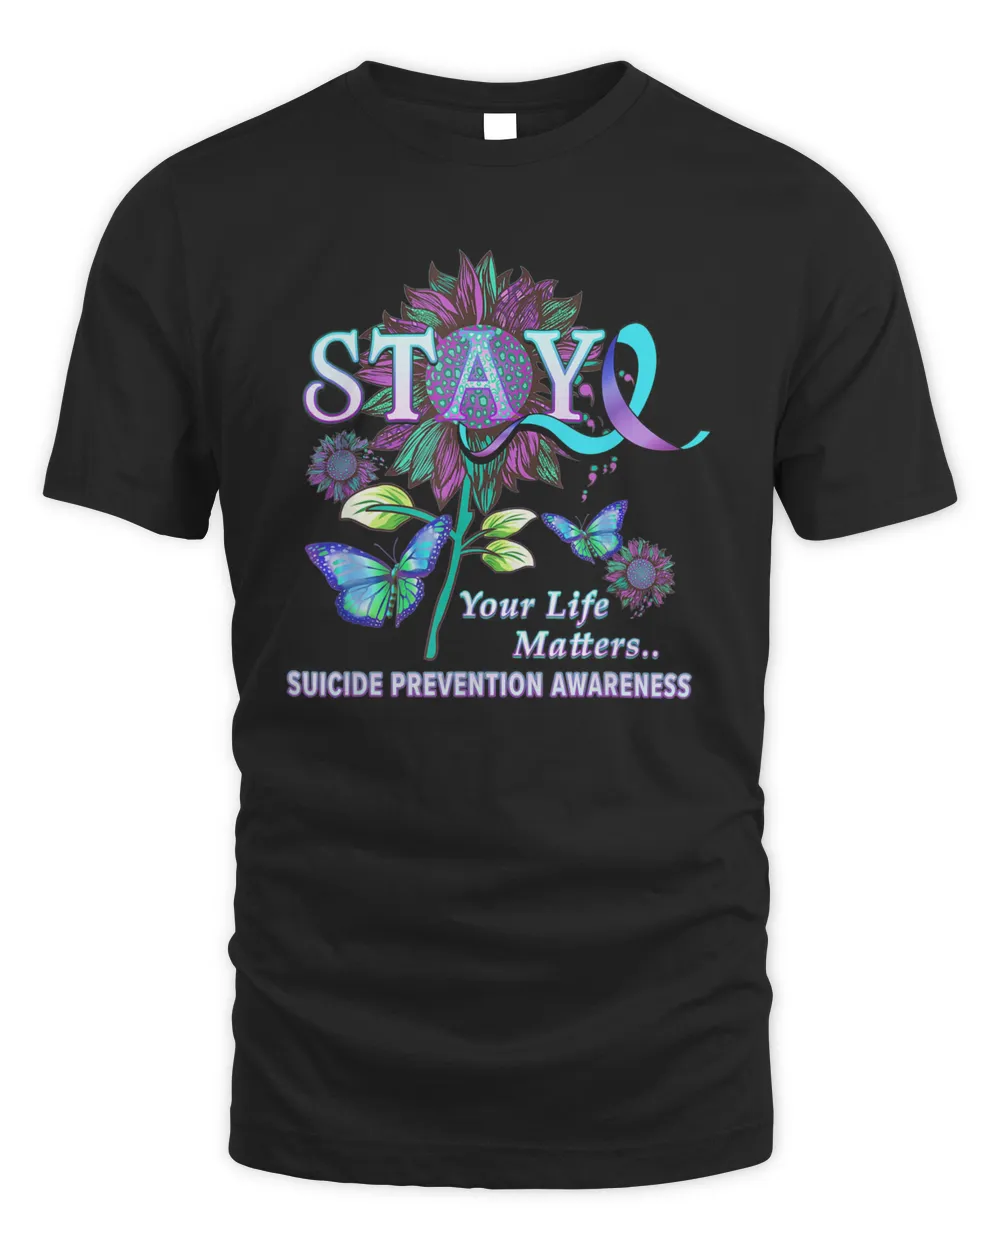 Stay Your Life Matters Suicide Prevention Awareness Shirt